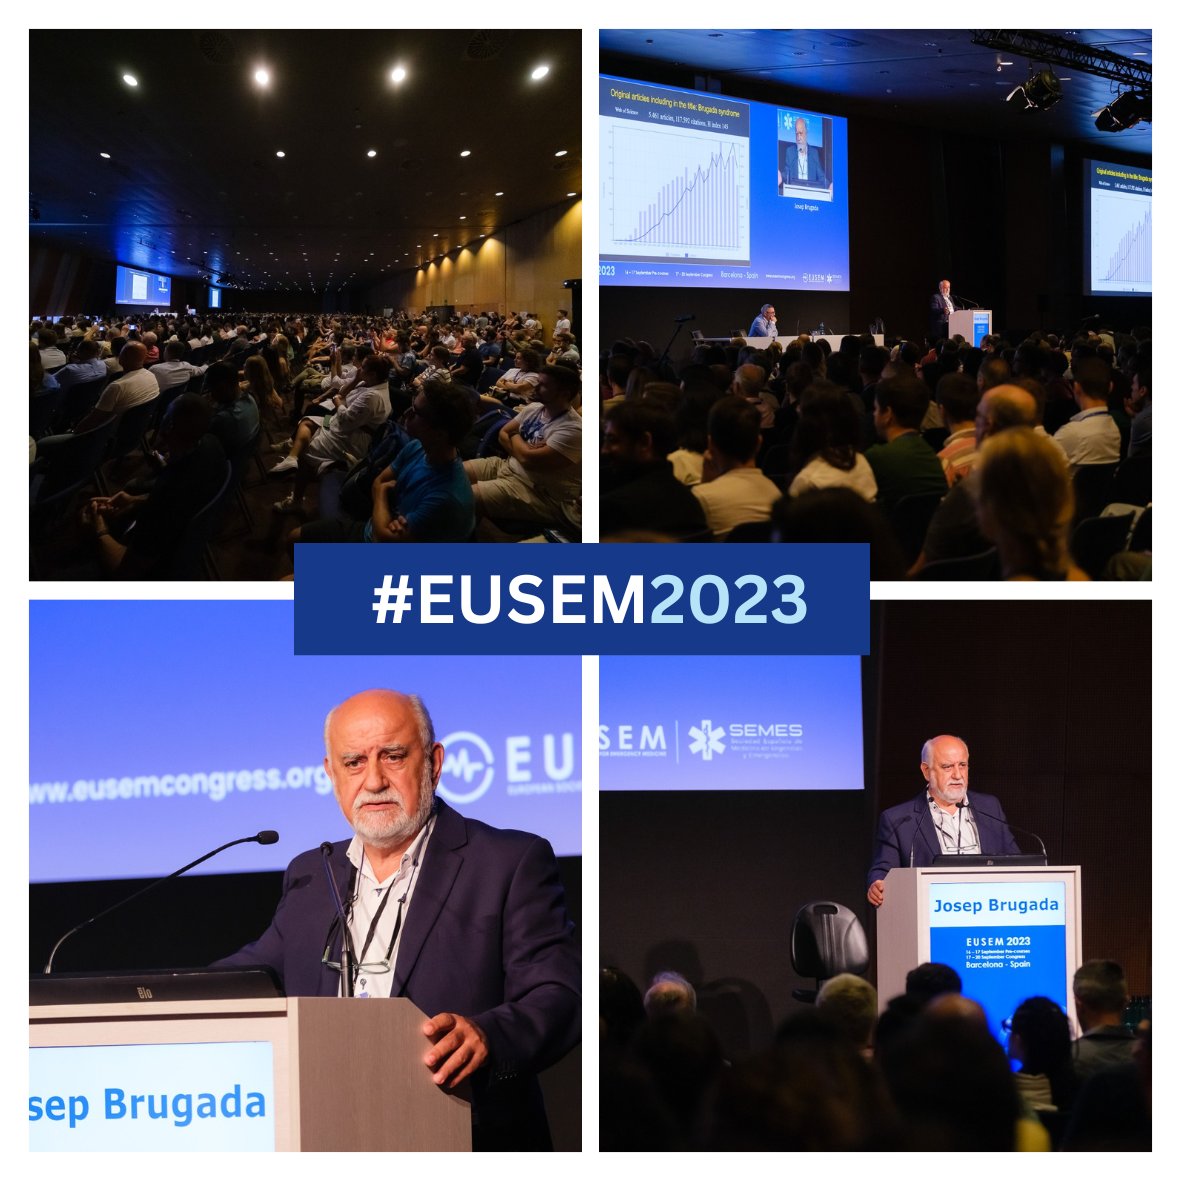 Dr Josep Brugada's session was a great success! @ #EUSEM2023. Don't miss the Emergency Medicine Day campaign if you want to get involved @15:00 @the Podium behind the EUSEM booth #42 Download the app eusemcongress.org #EUSEM #EmergencyMedicine #healtheducation